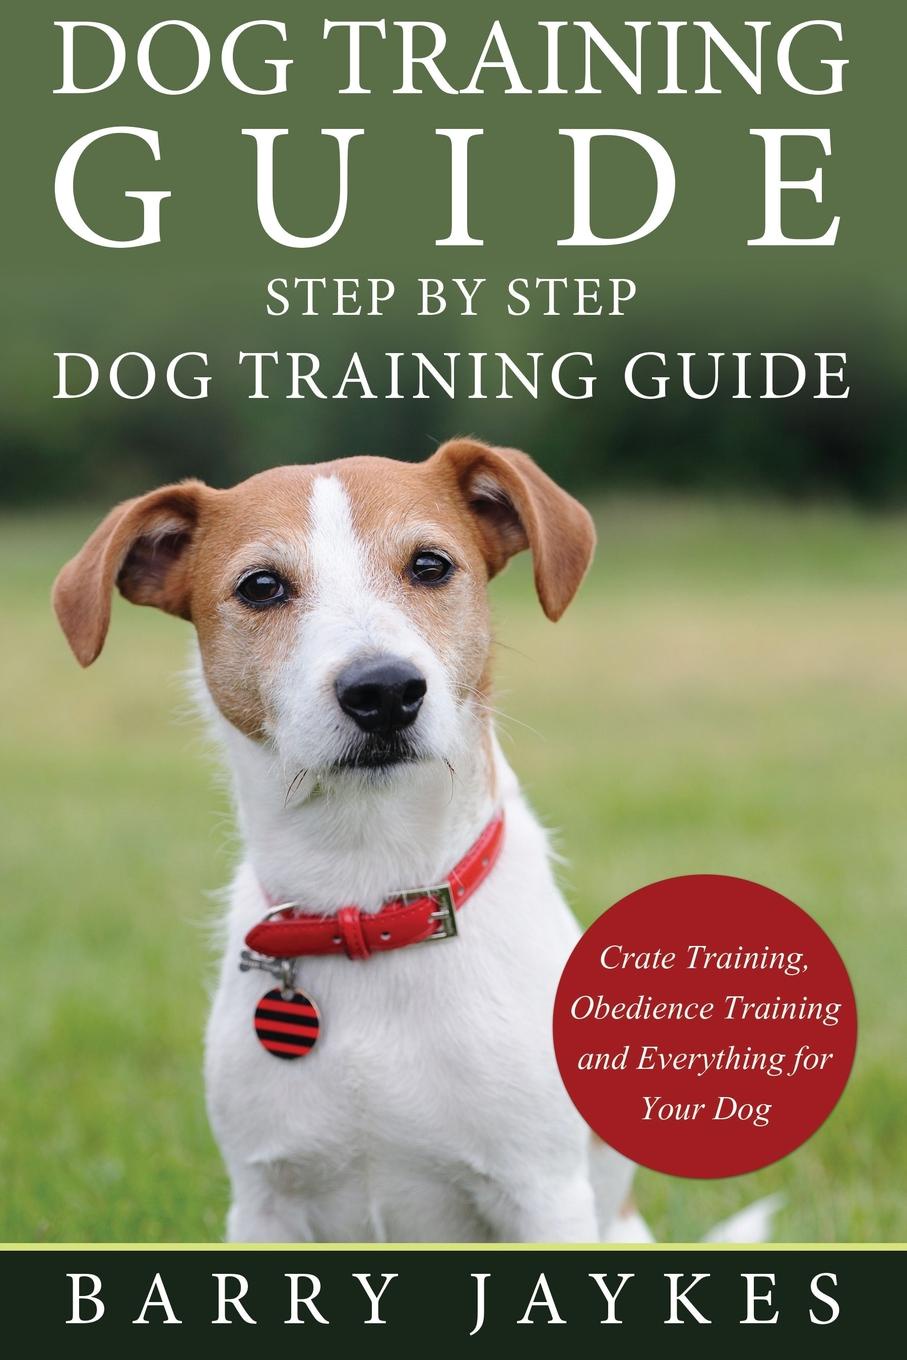 Dog Training Guide. Step by Step Dog Training Guide